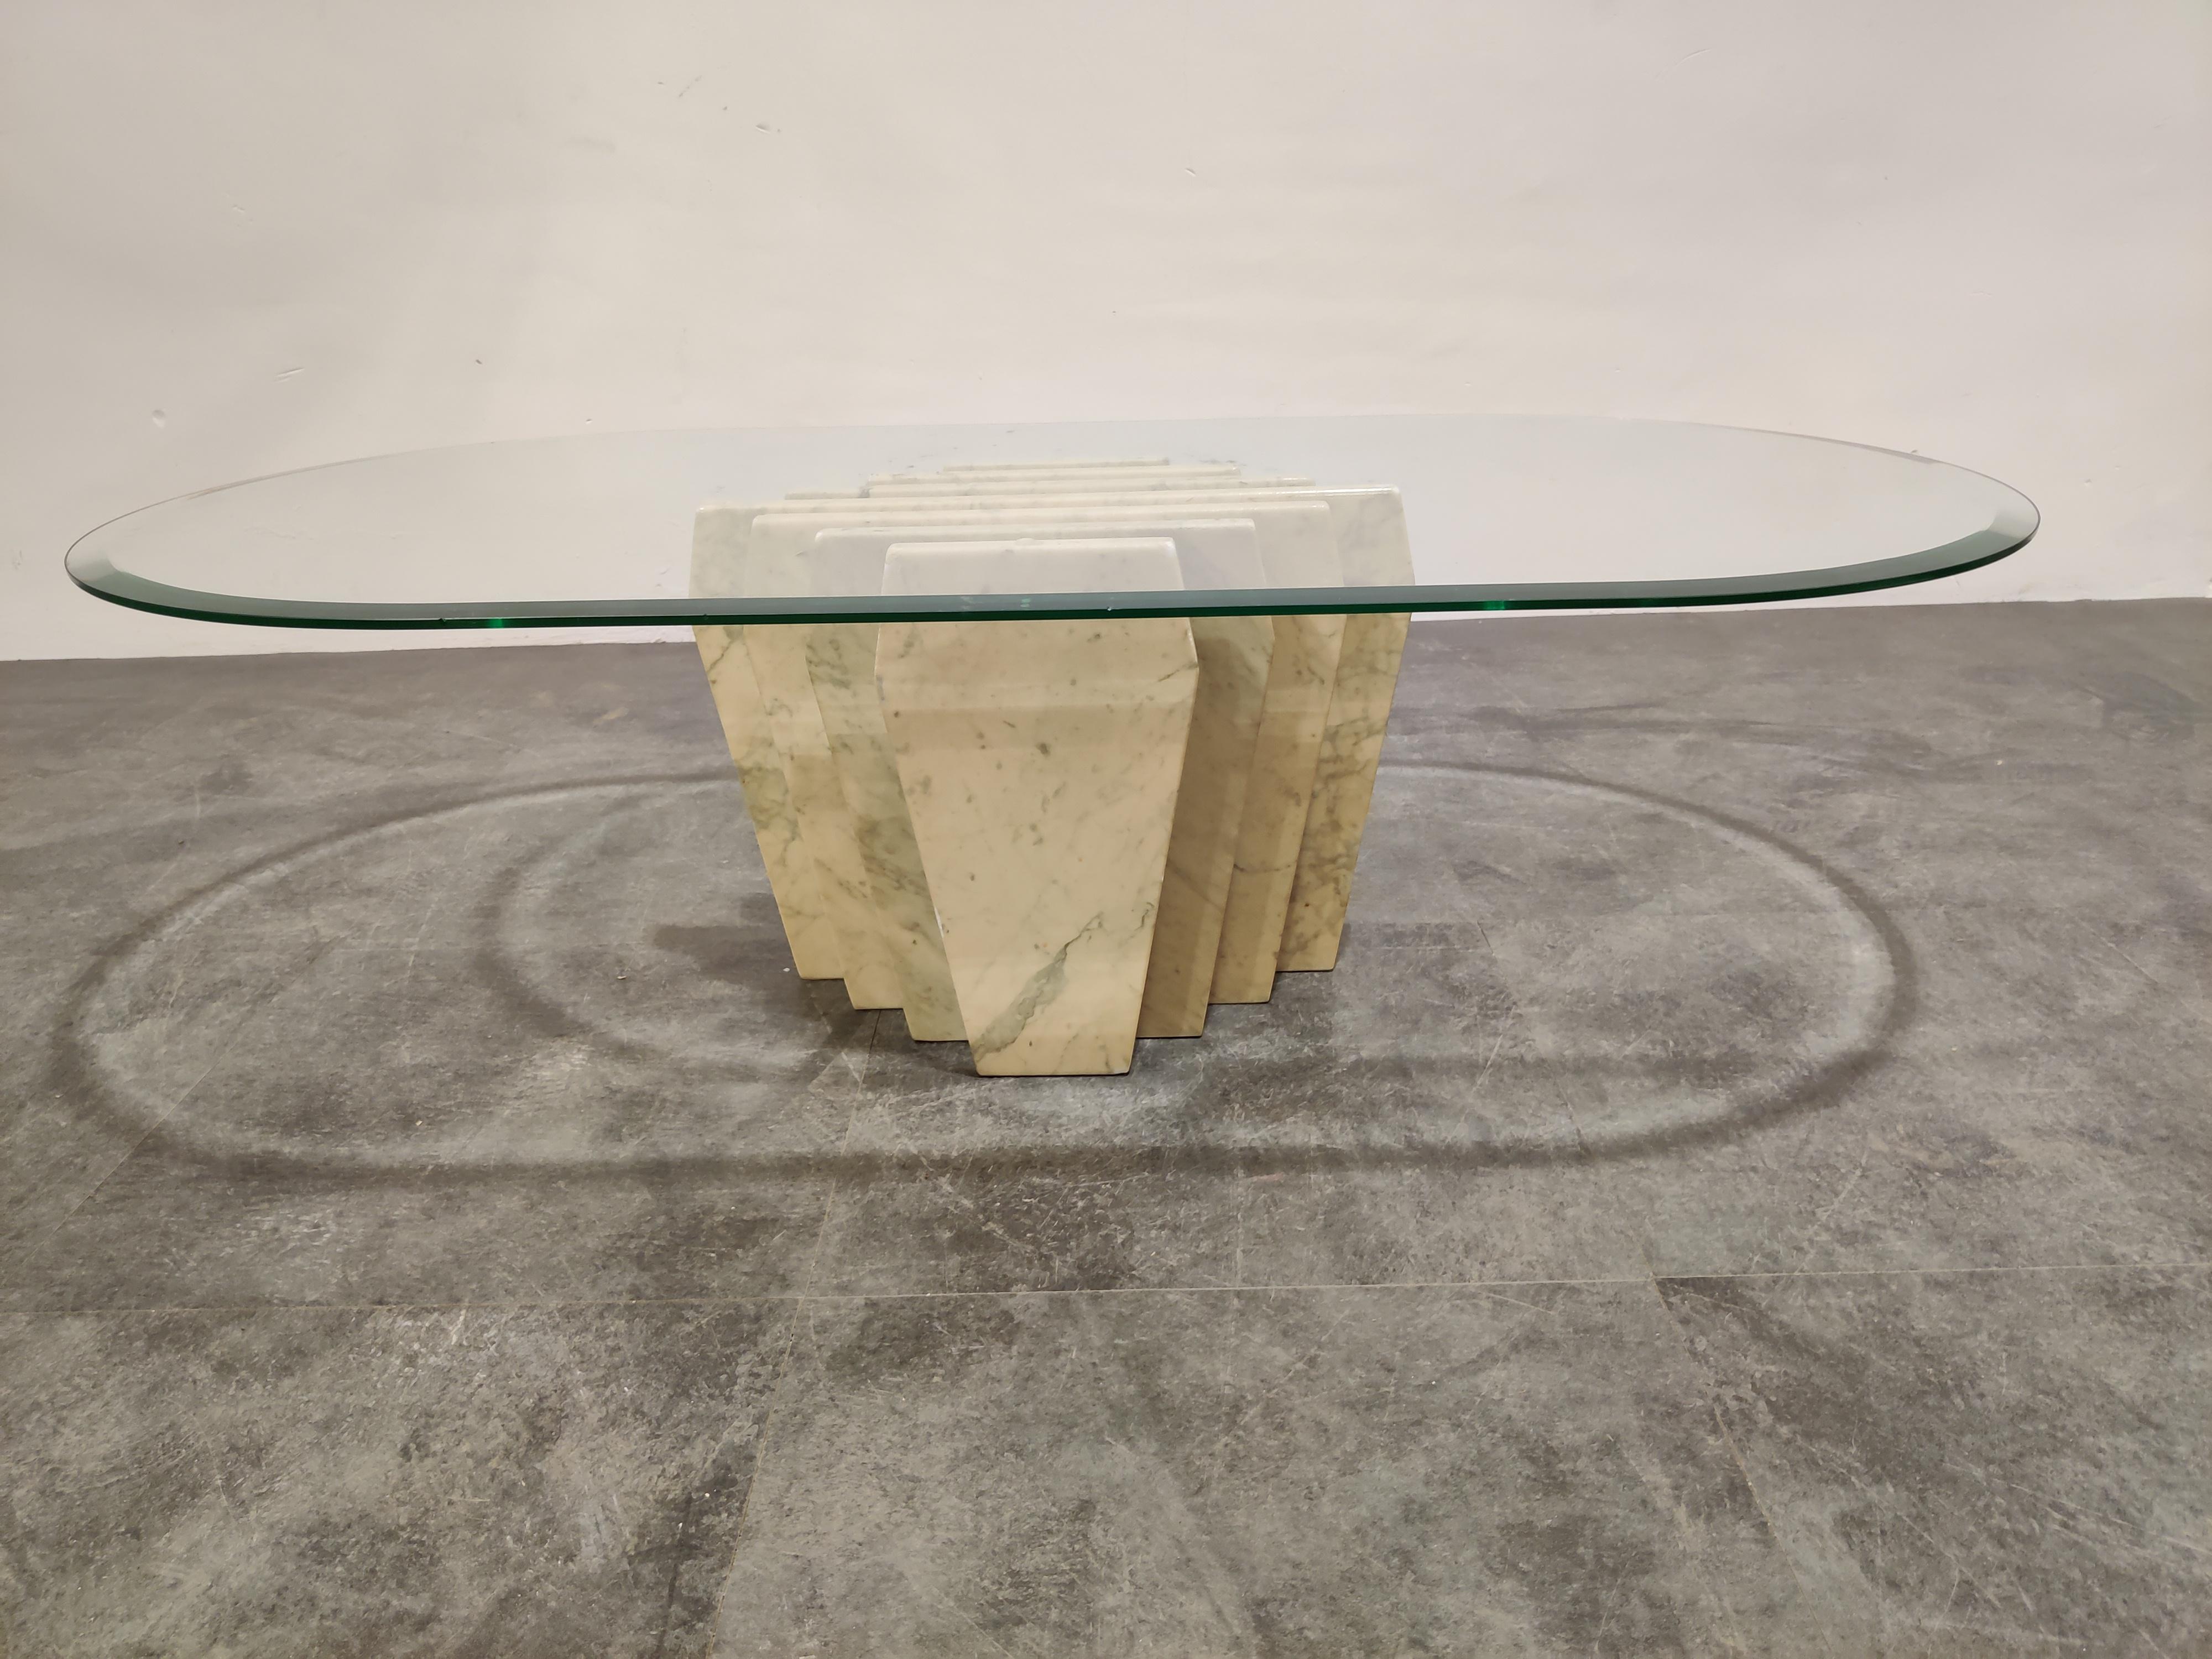 Vintage marble slabs coffee table.

Architectural table base with a beveled oval glass top. 

The table base has some chips on the top corners but has still a good overall look. Glass is fine. 

1980s, Italy

Dimensions:
Height